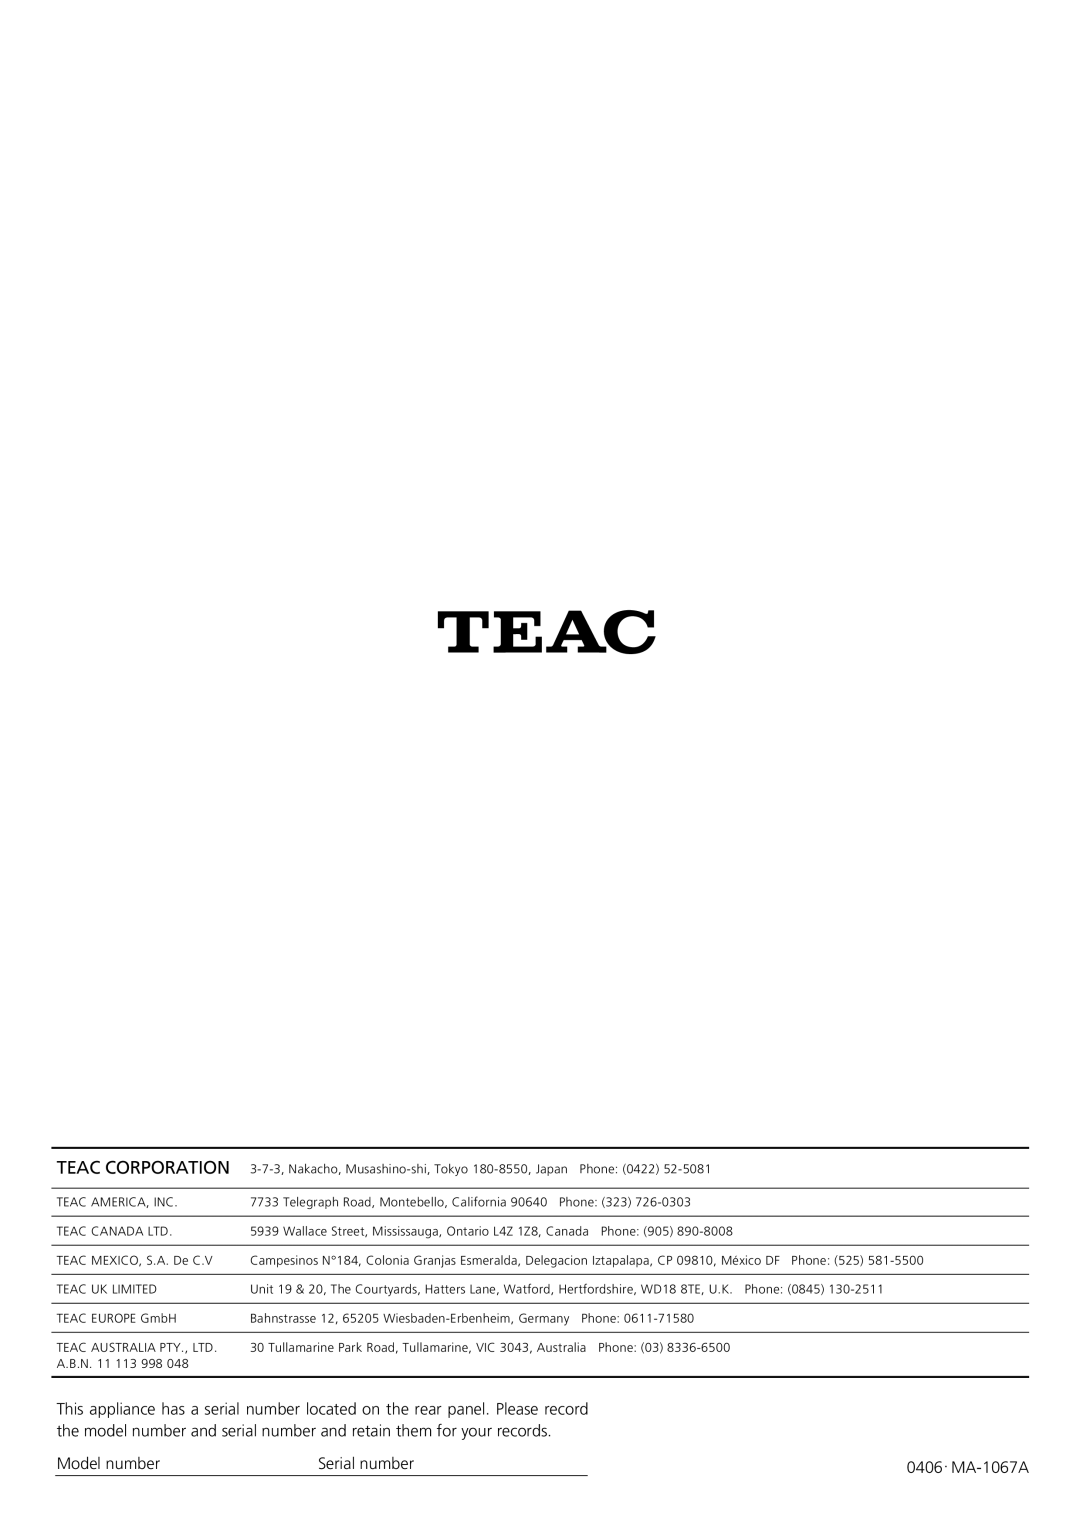 Teac PD-D2610 owner manual Teac Corporation, Model number, Serial number, MA-1067A 